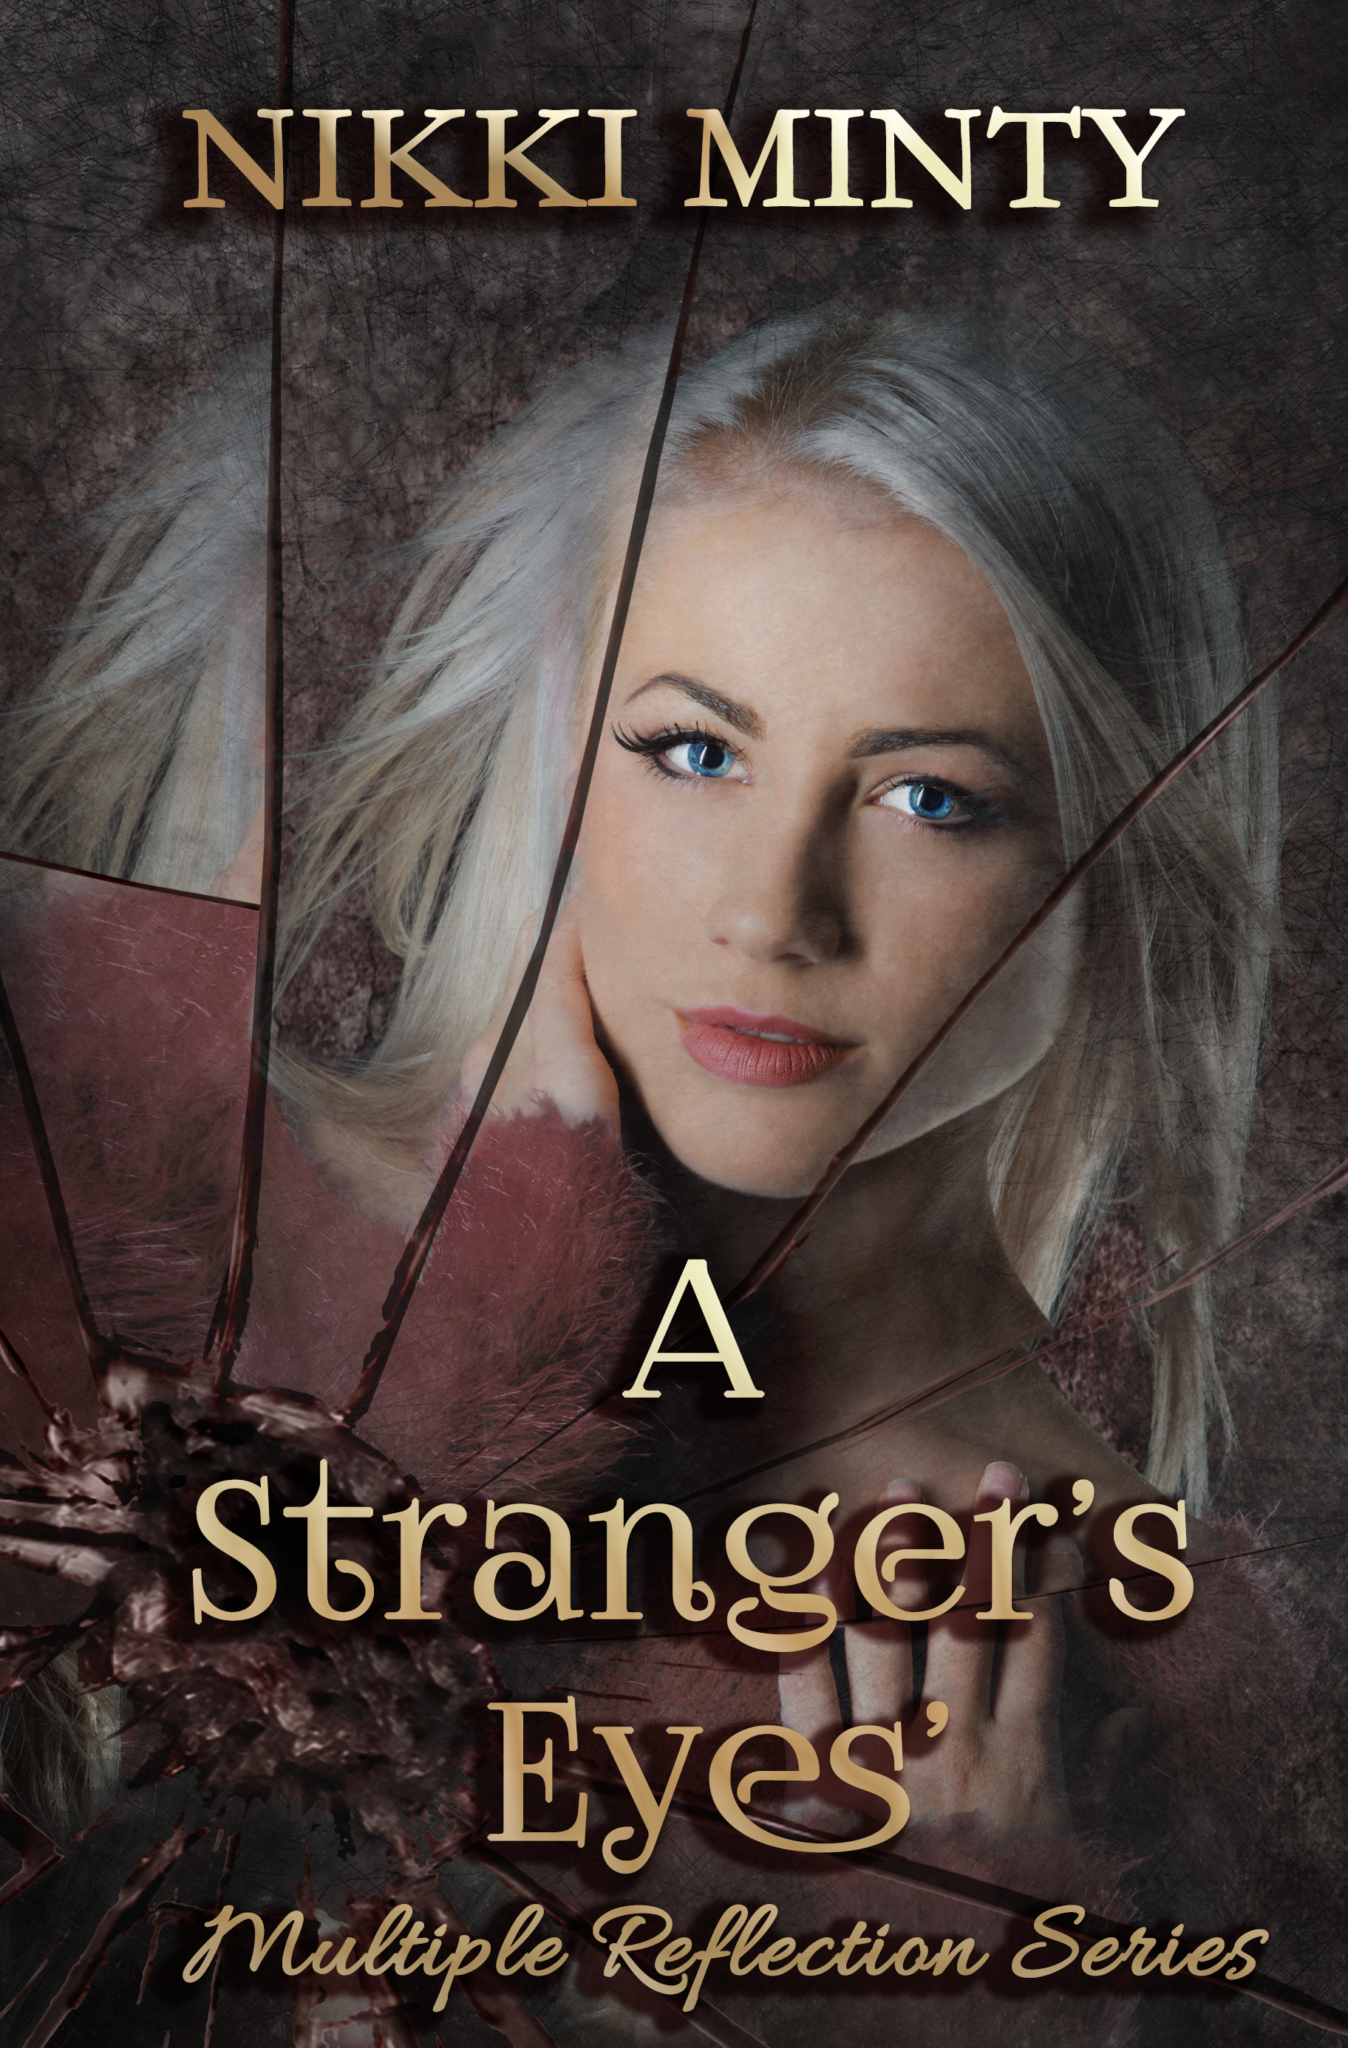 A Stranger’s Eyes: Multiple Reflection Series by Nikki Minty